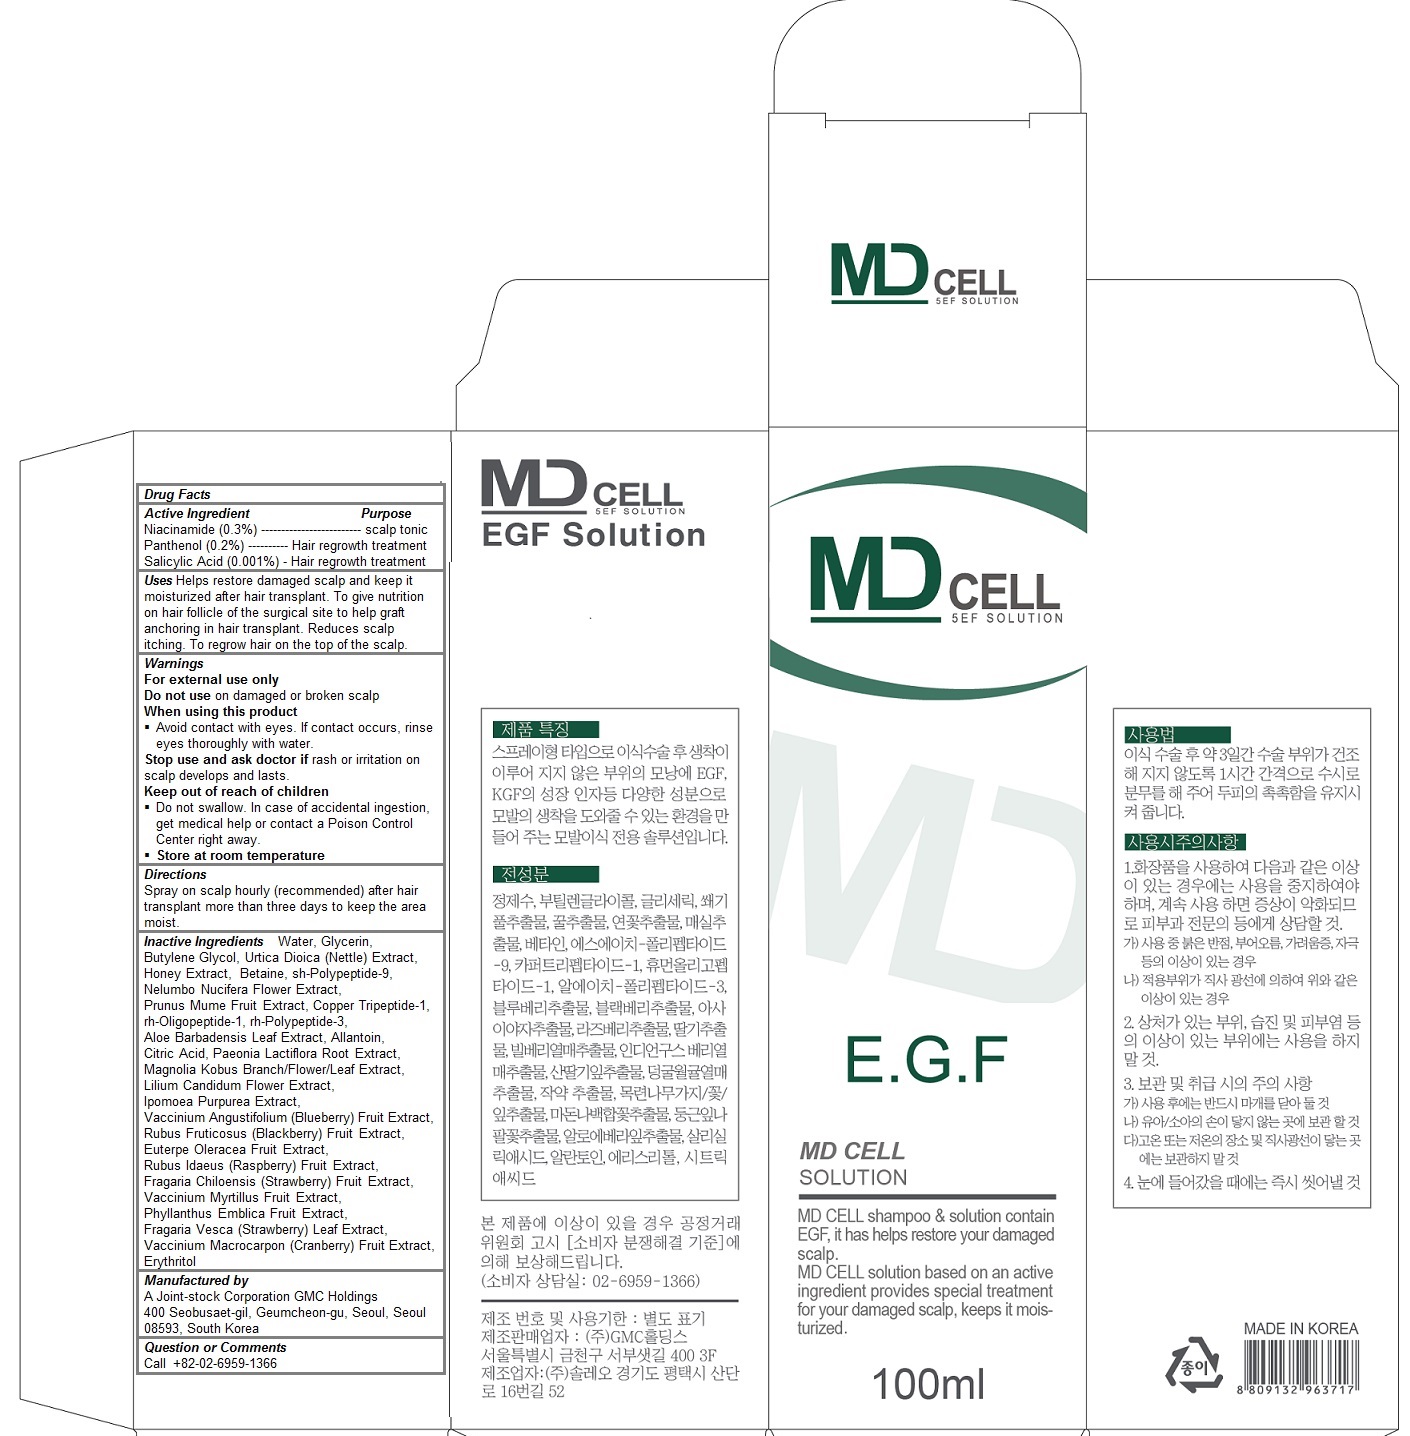 md cell solution